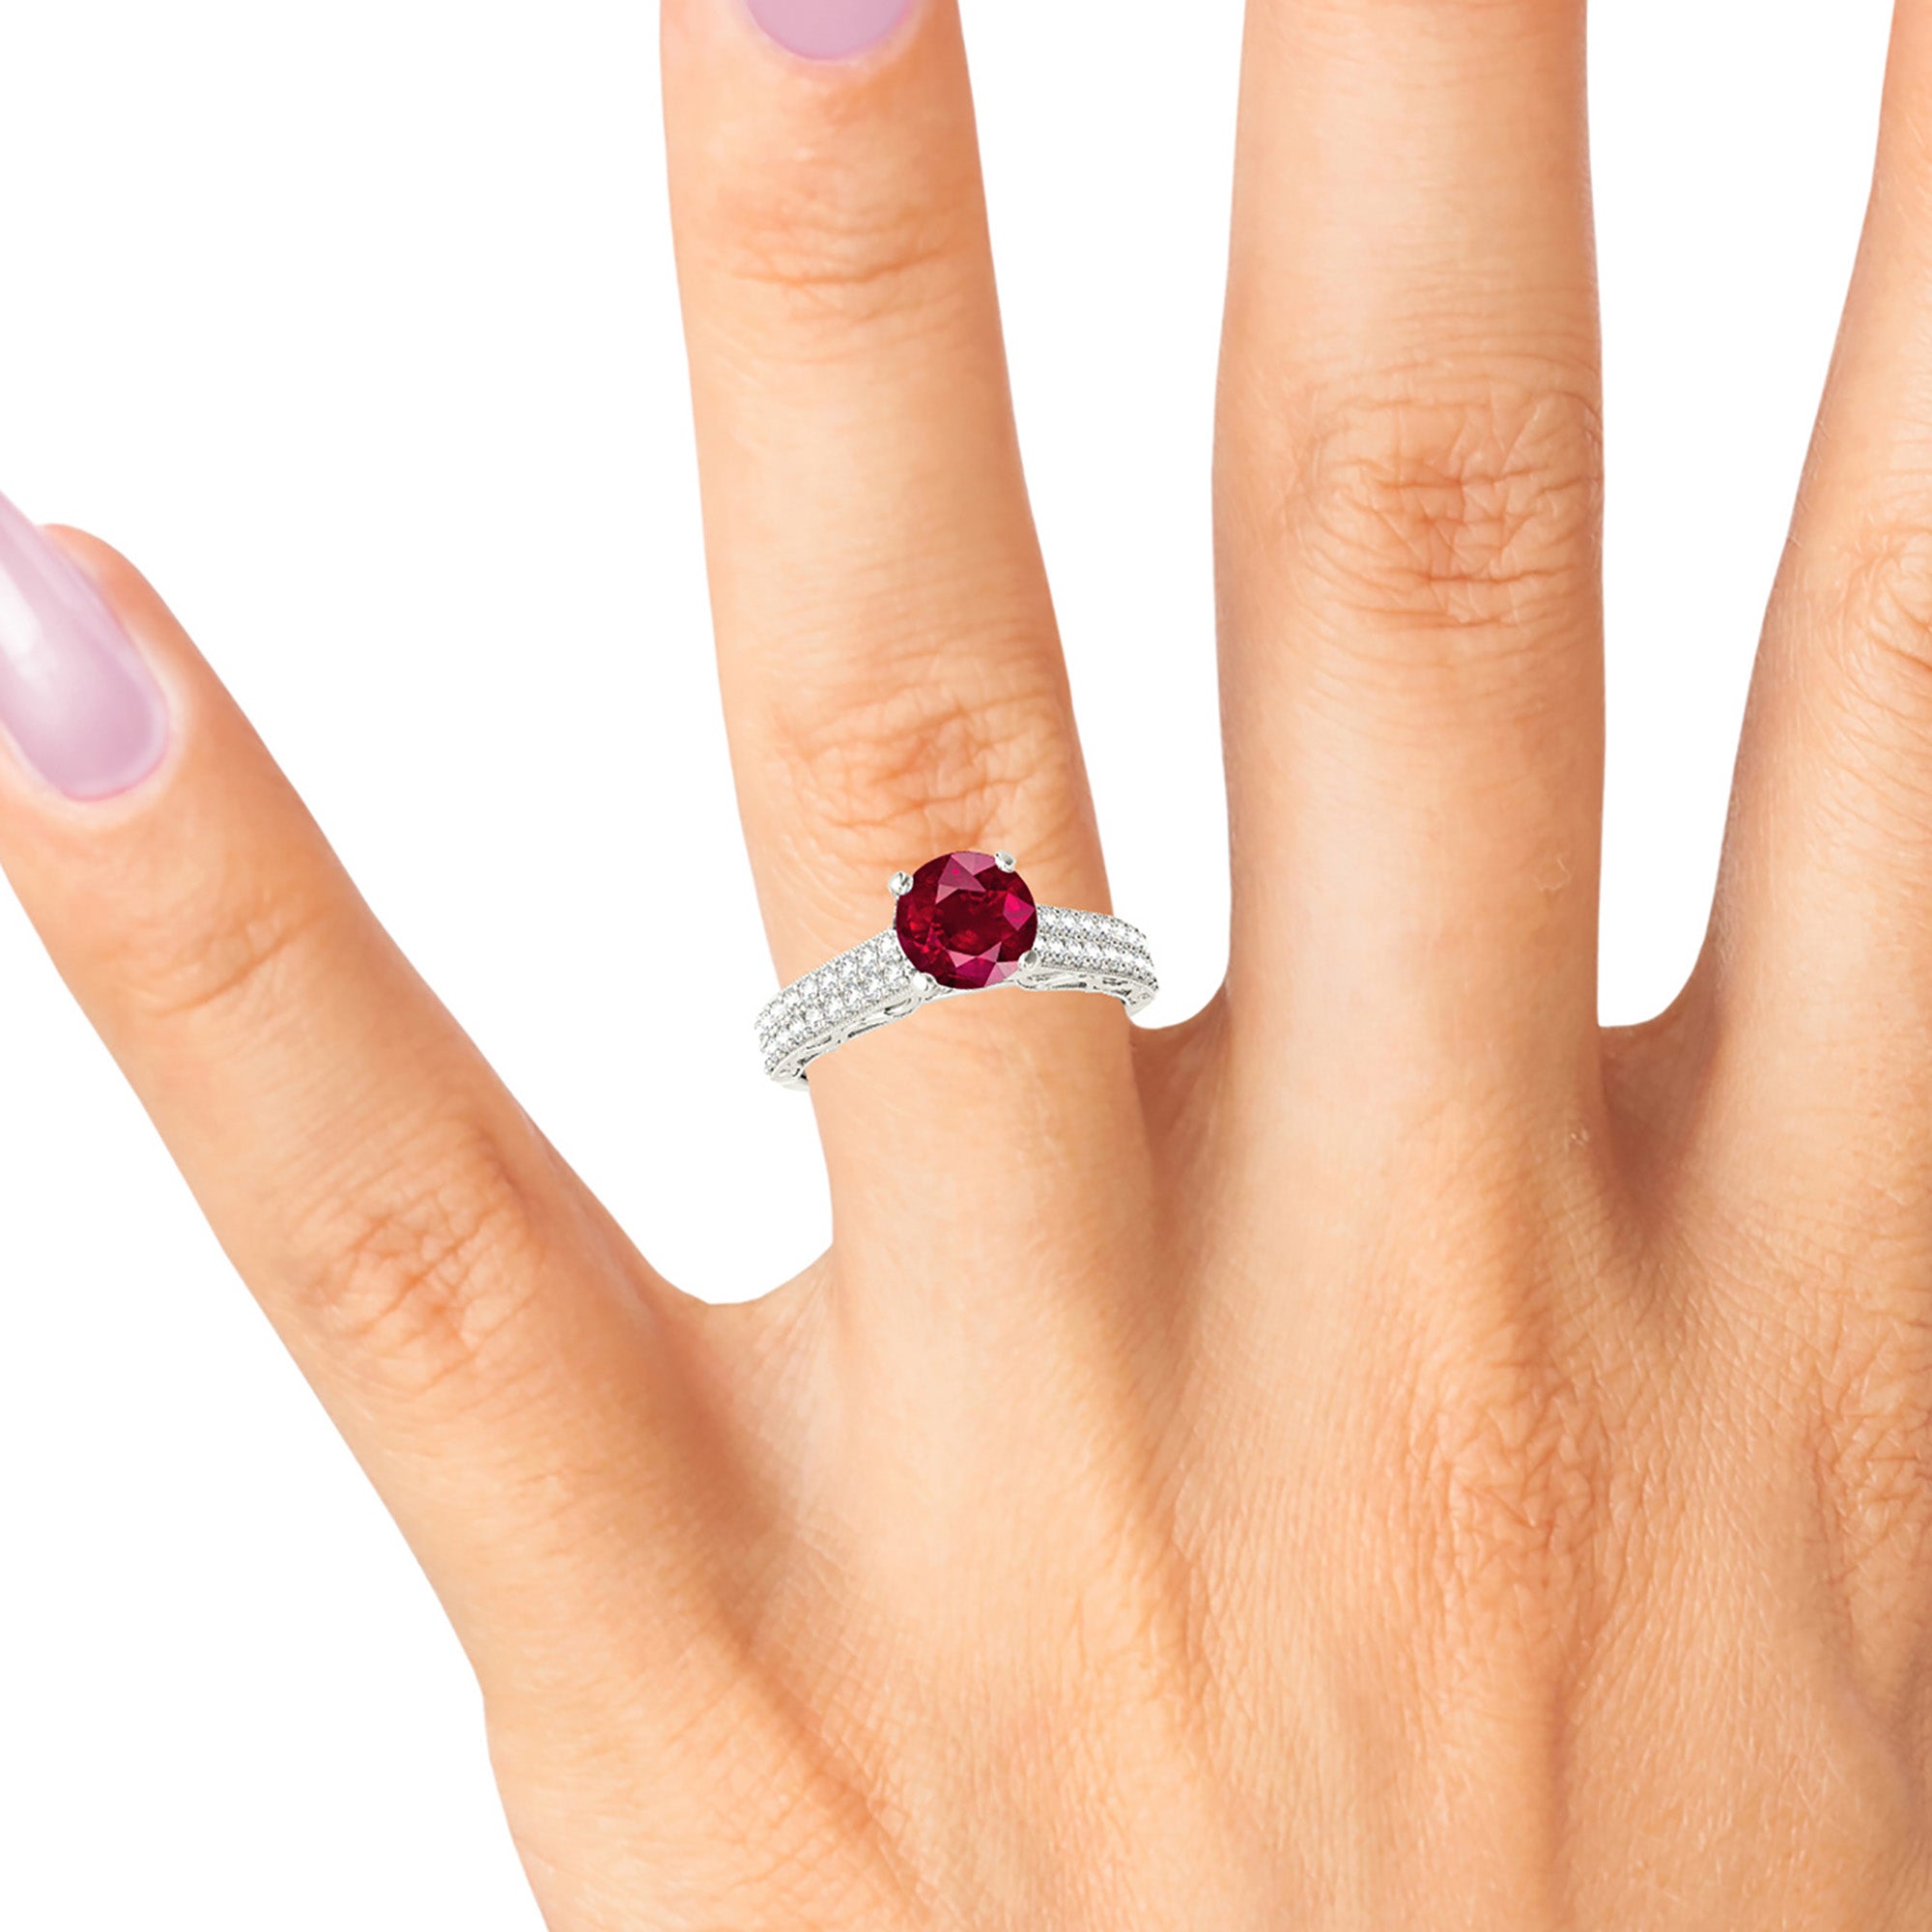 1.35 ct. Genuine Solitaire Ruby Ring with 0.35 ctw. Double Row Diamond Band,Milgrain Design-in 14K/18K White, Yellow, Rose Gold and Platinum - Christmas Jewelry Gift -VIRABYANI